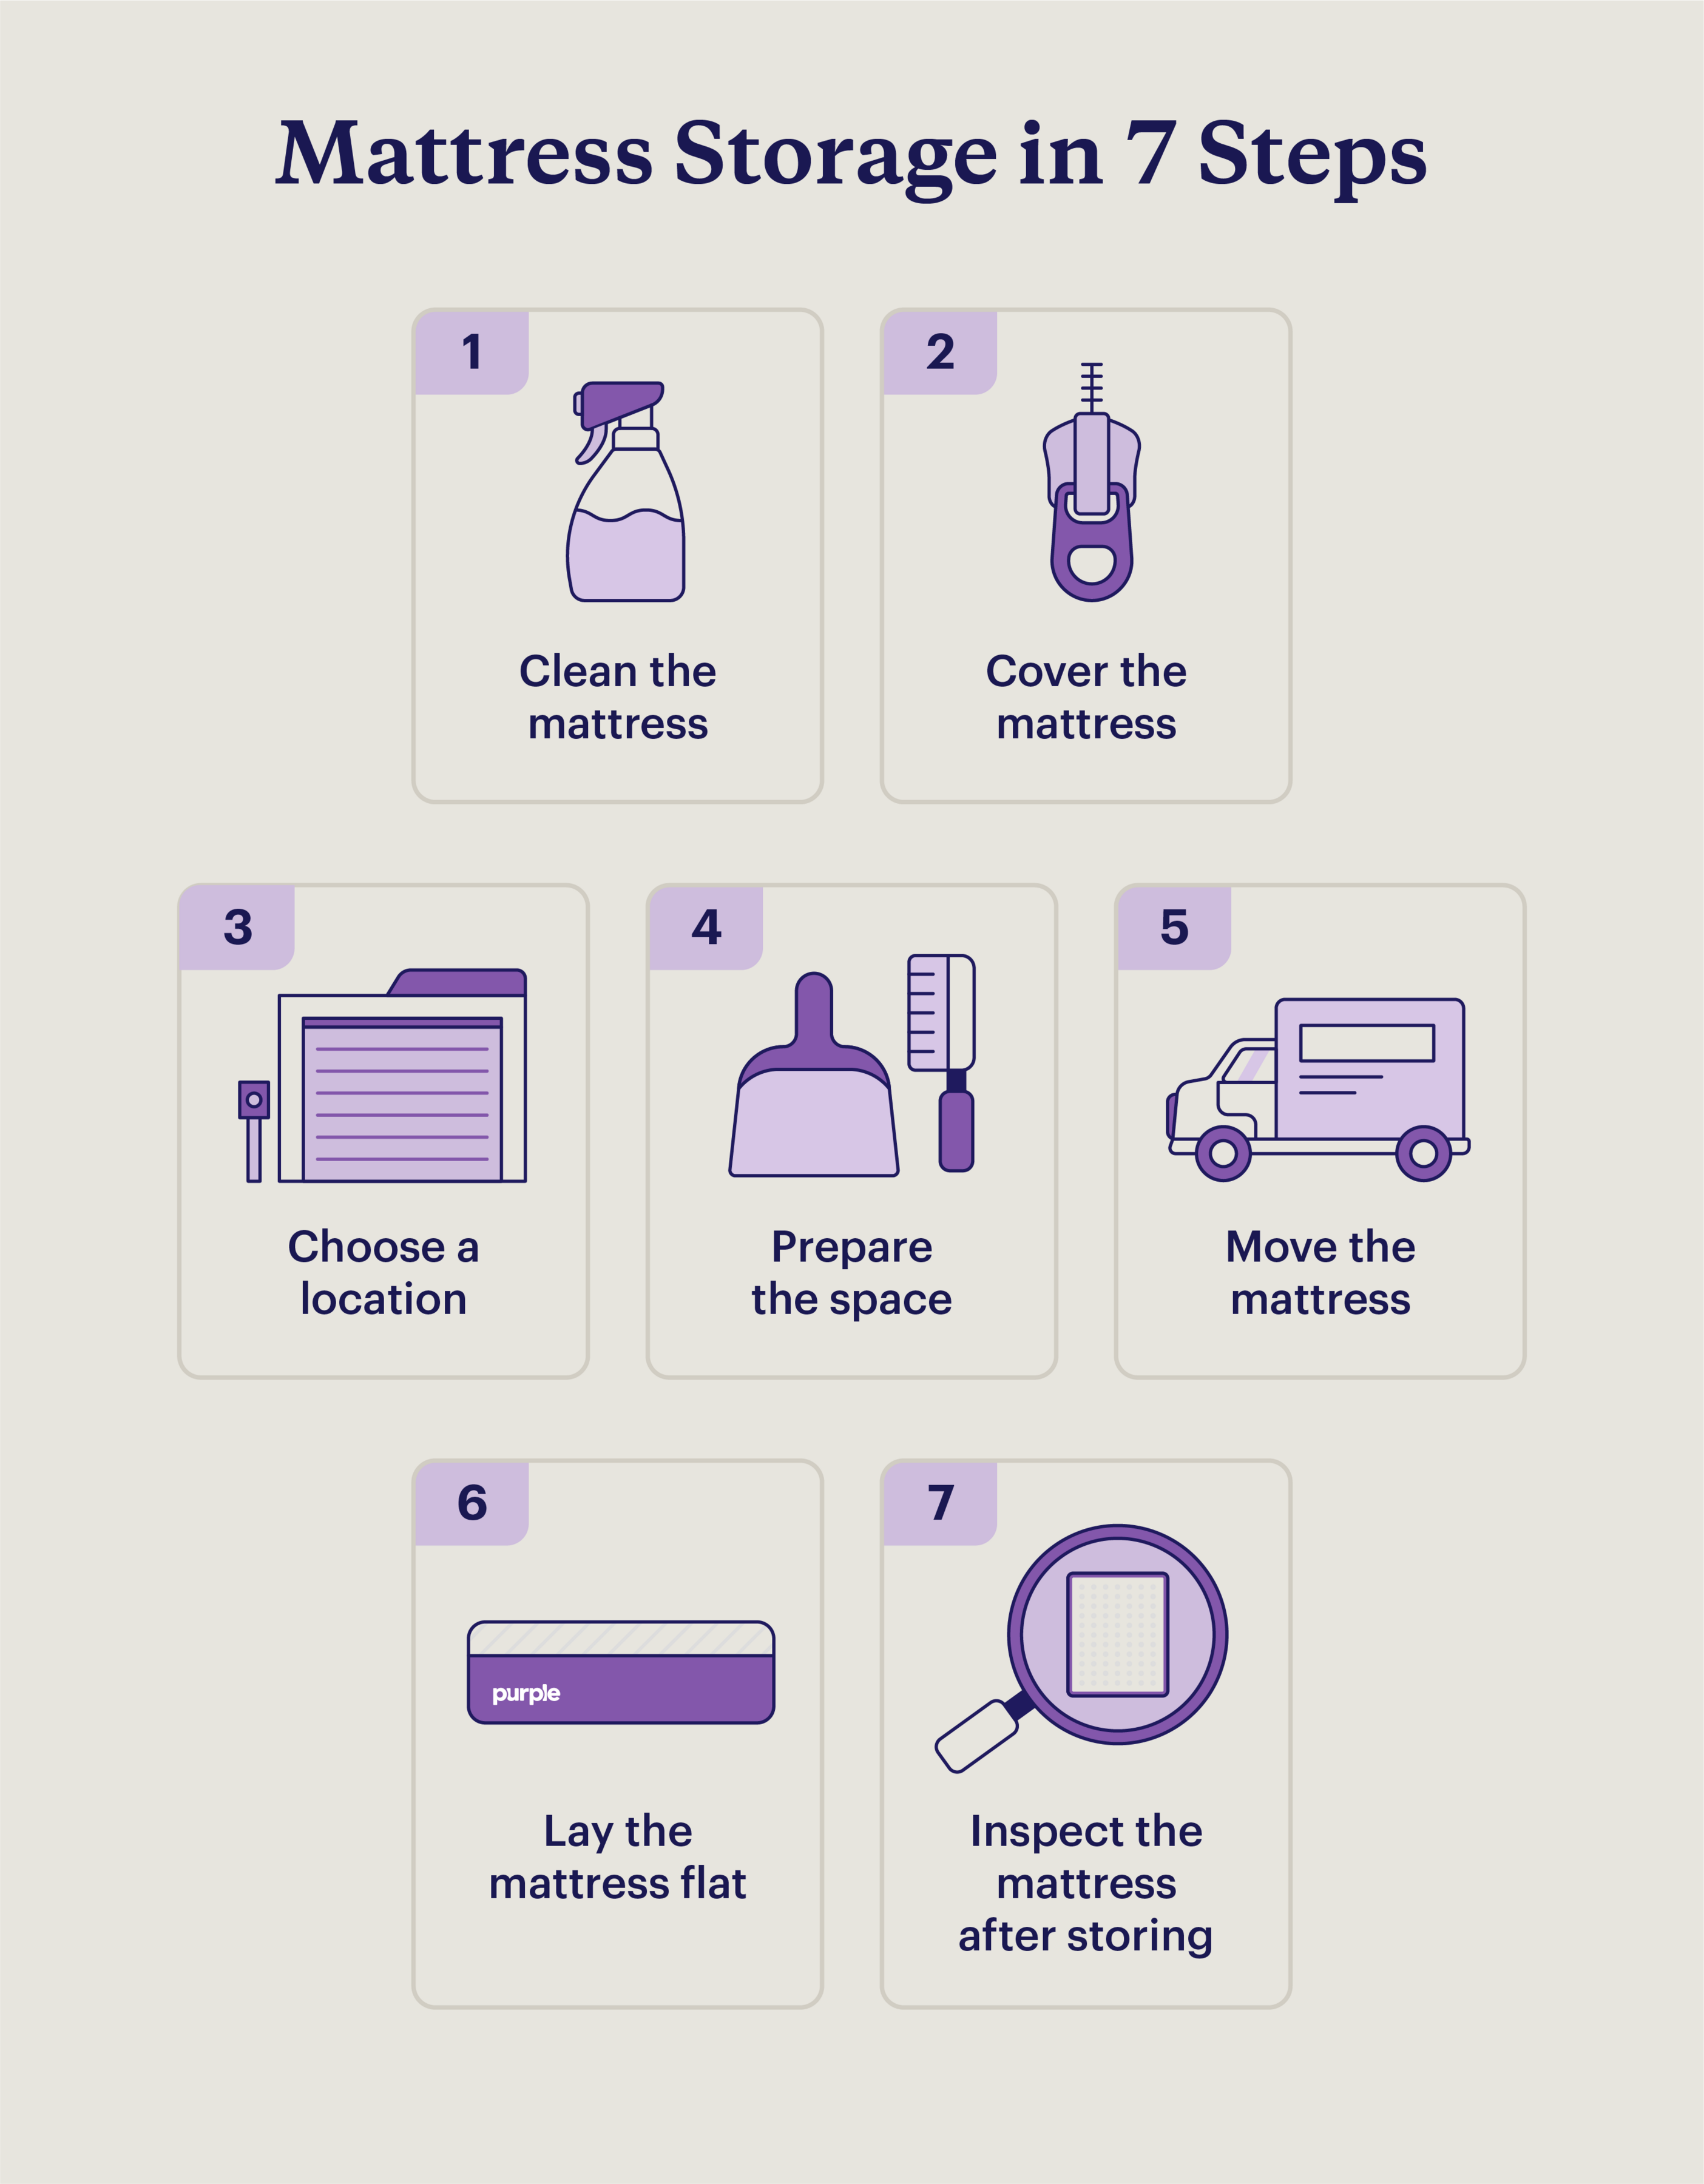 A graphic highlighting 7 steps for storing a mattress.